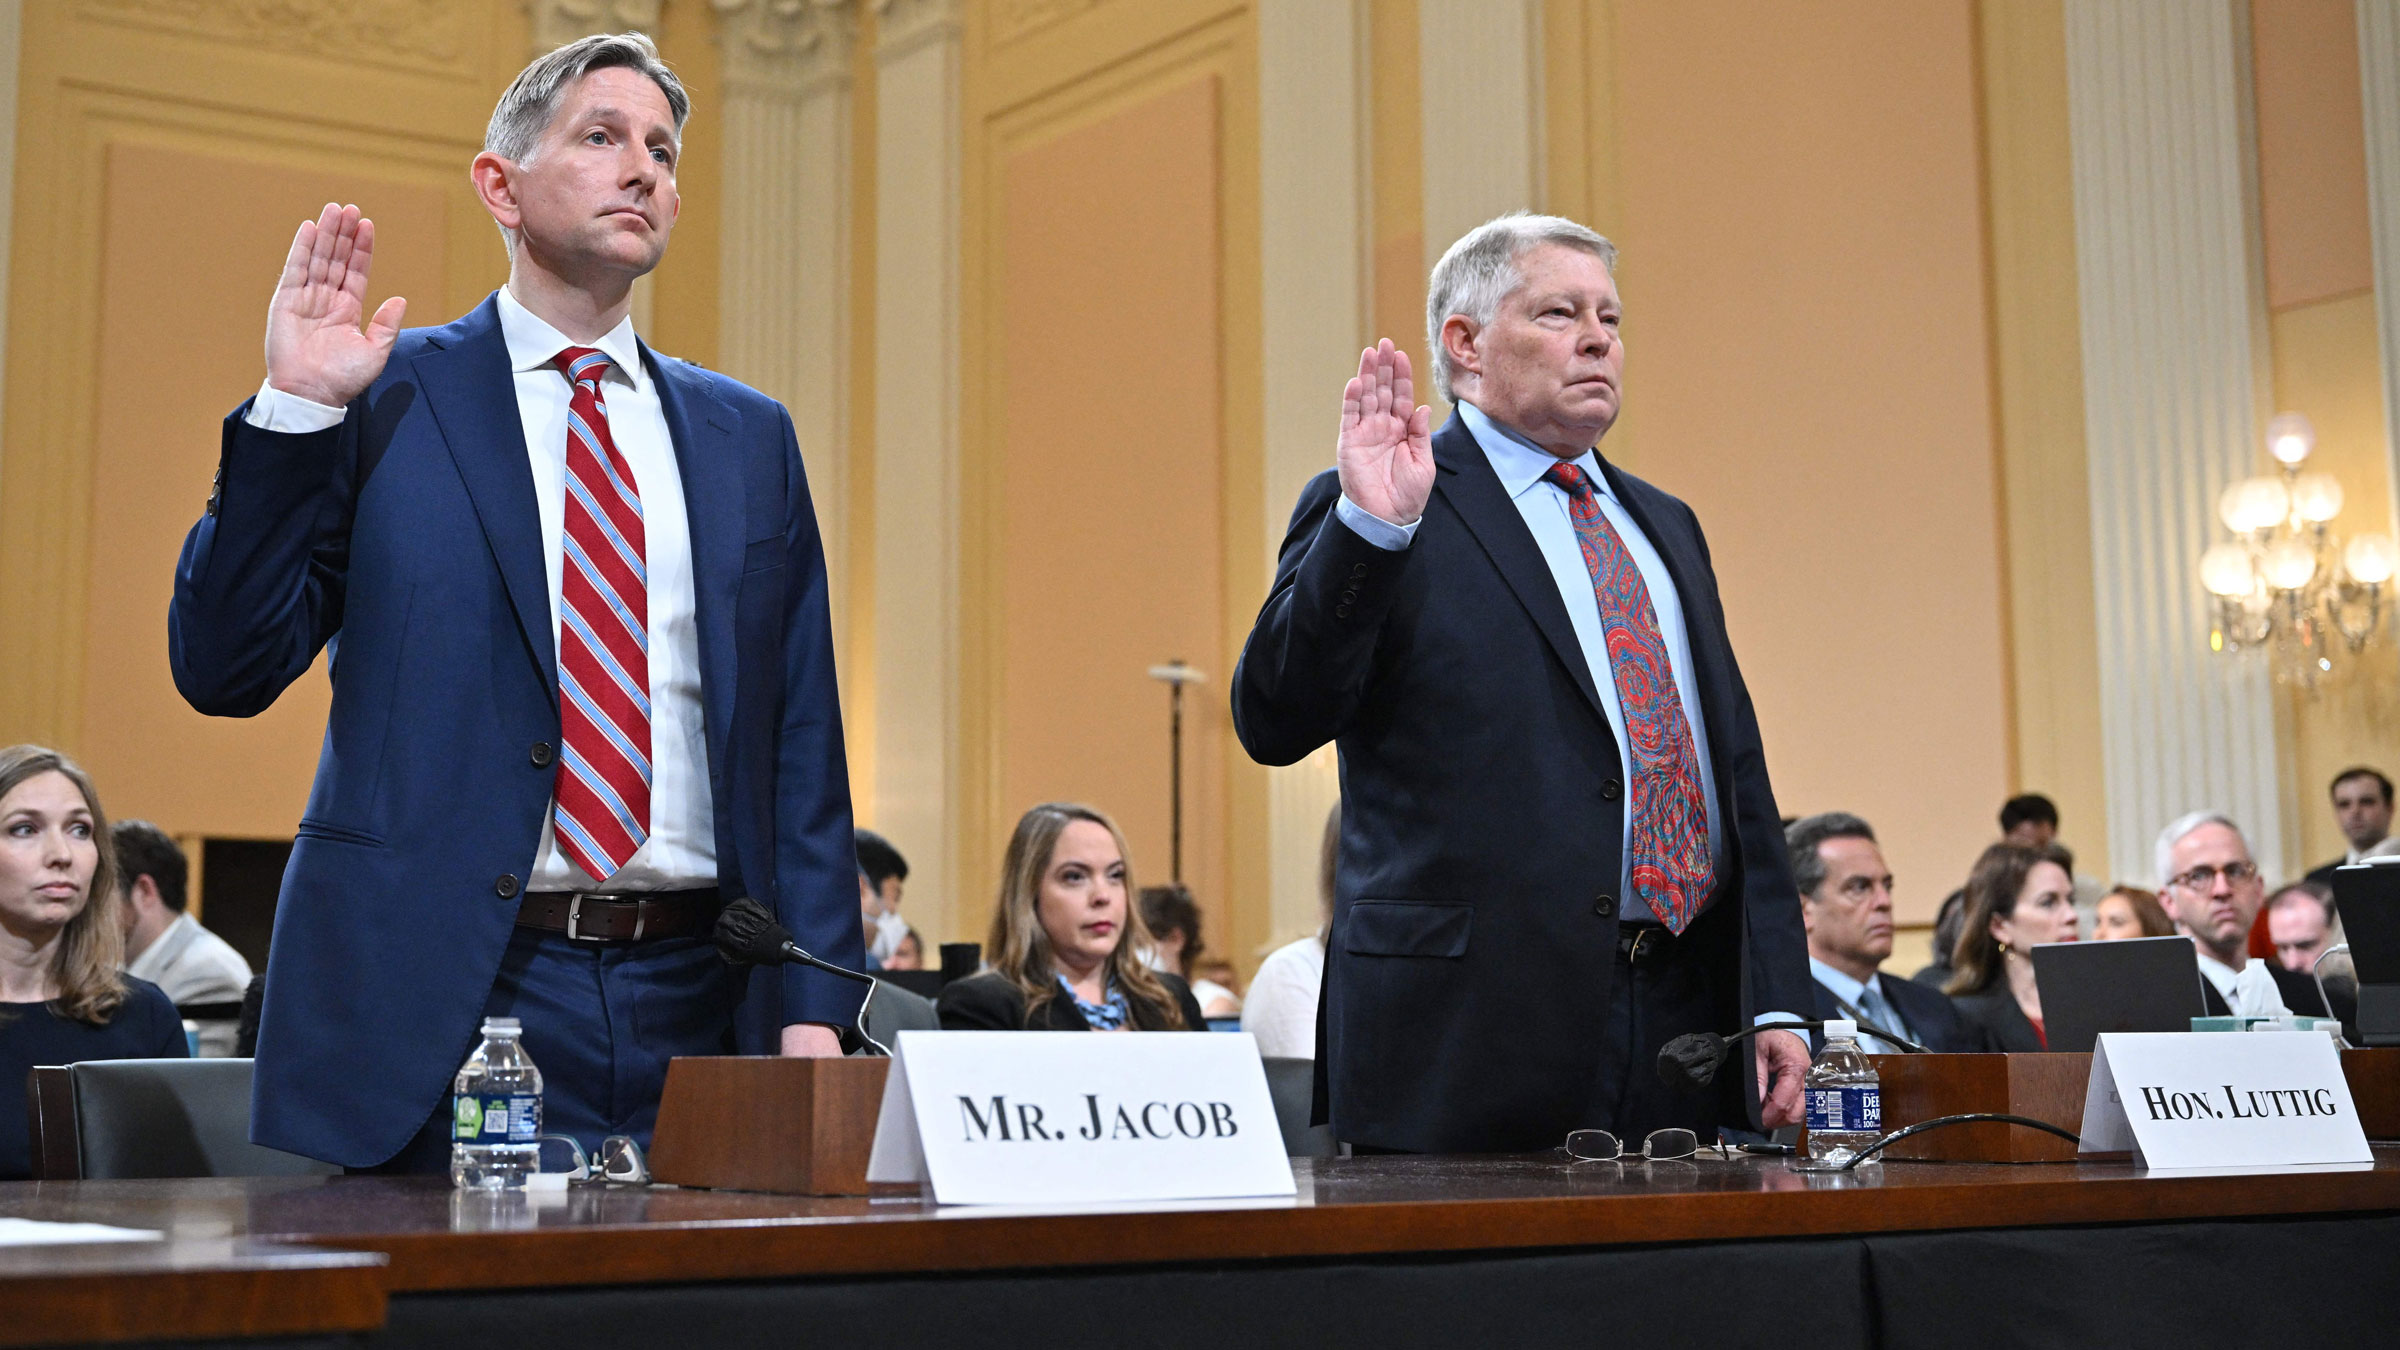 Greg Jacob, left, and J. Michael Luttig are sworn in before testifying on Thursday.